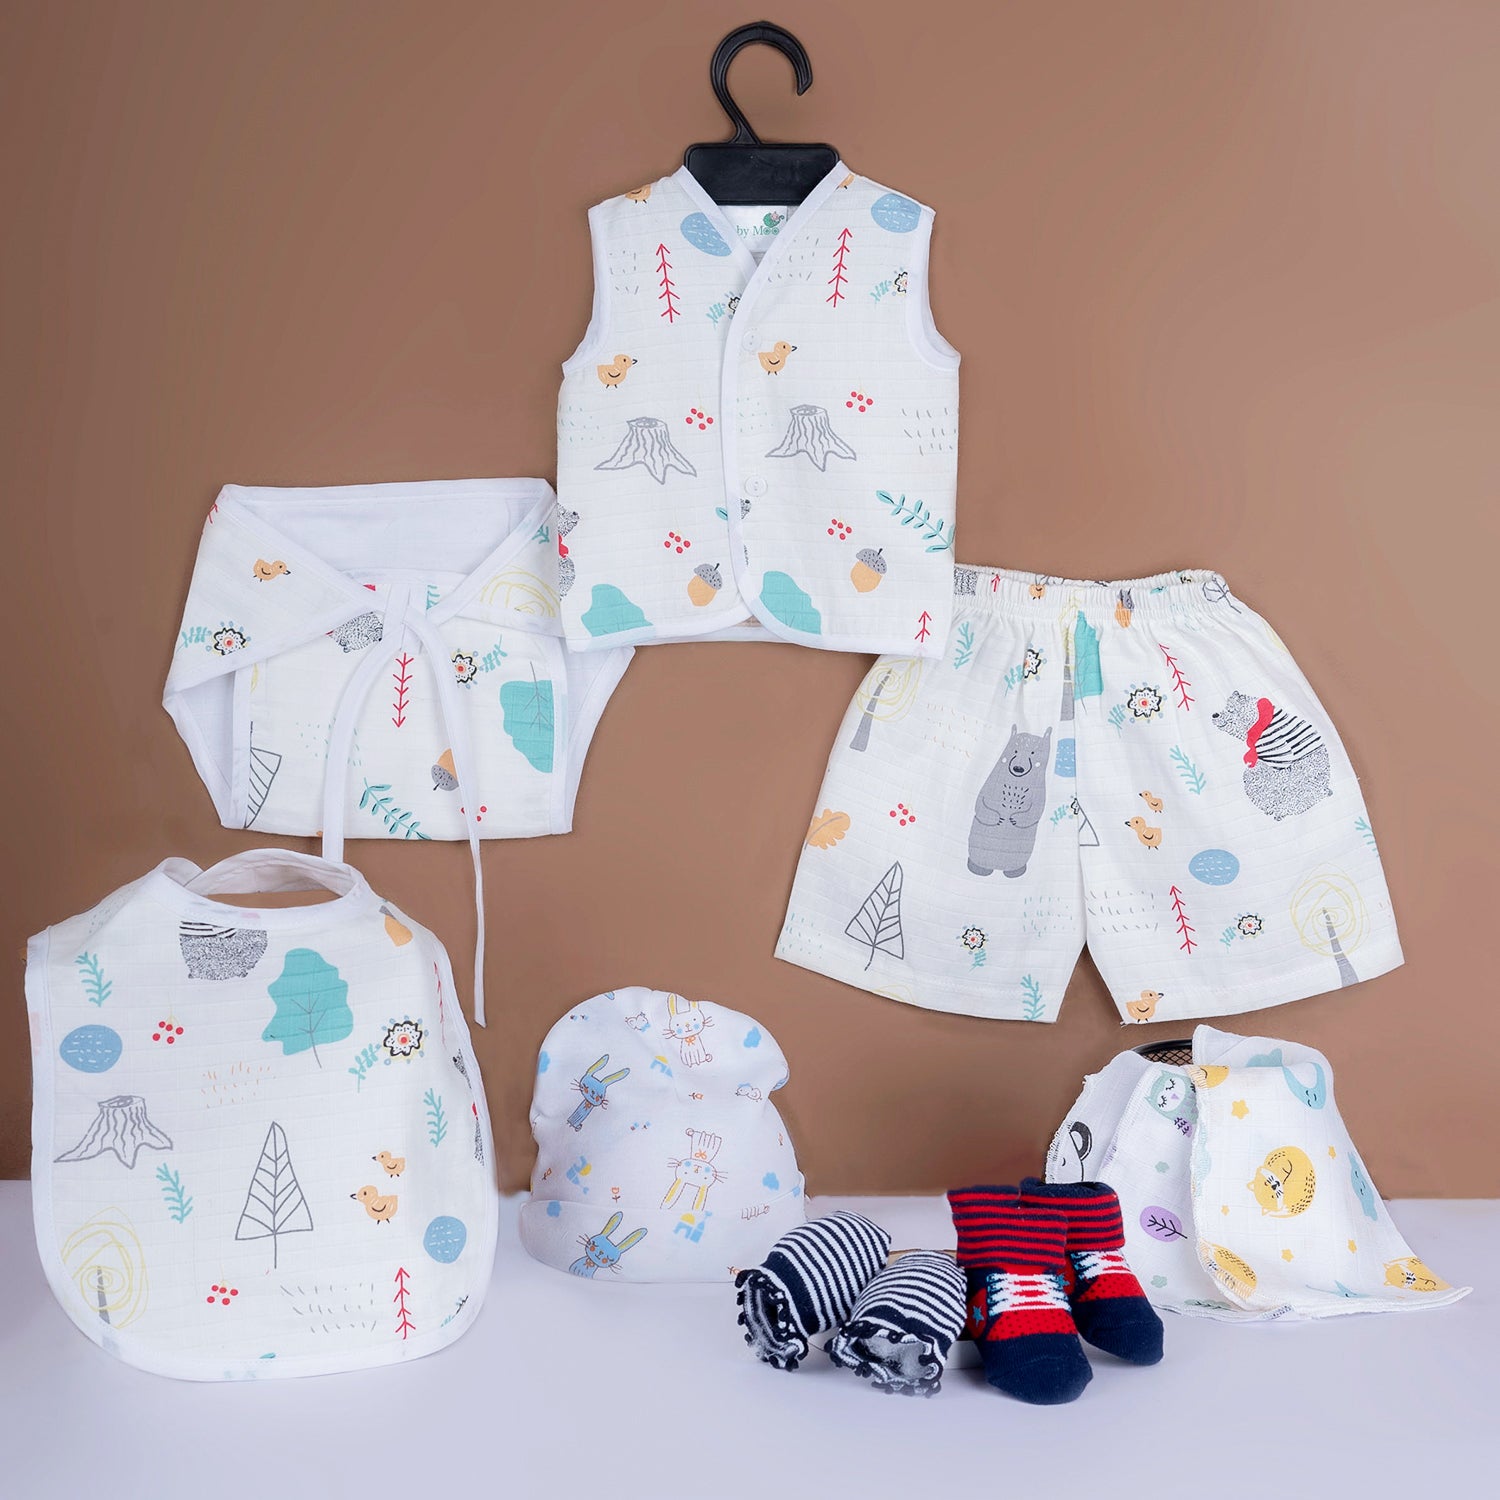 Baby Moo Nature Lover Infant Essentials 10 Pcs Muslin Clothing Gift Set - Multicolour